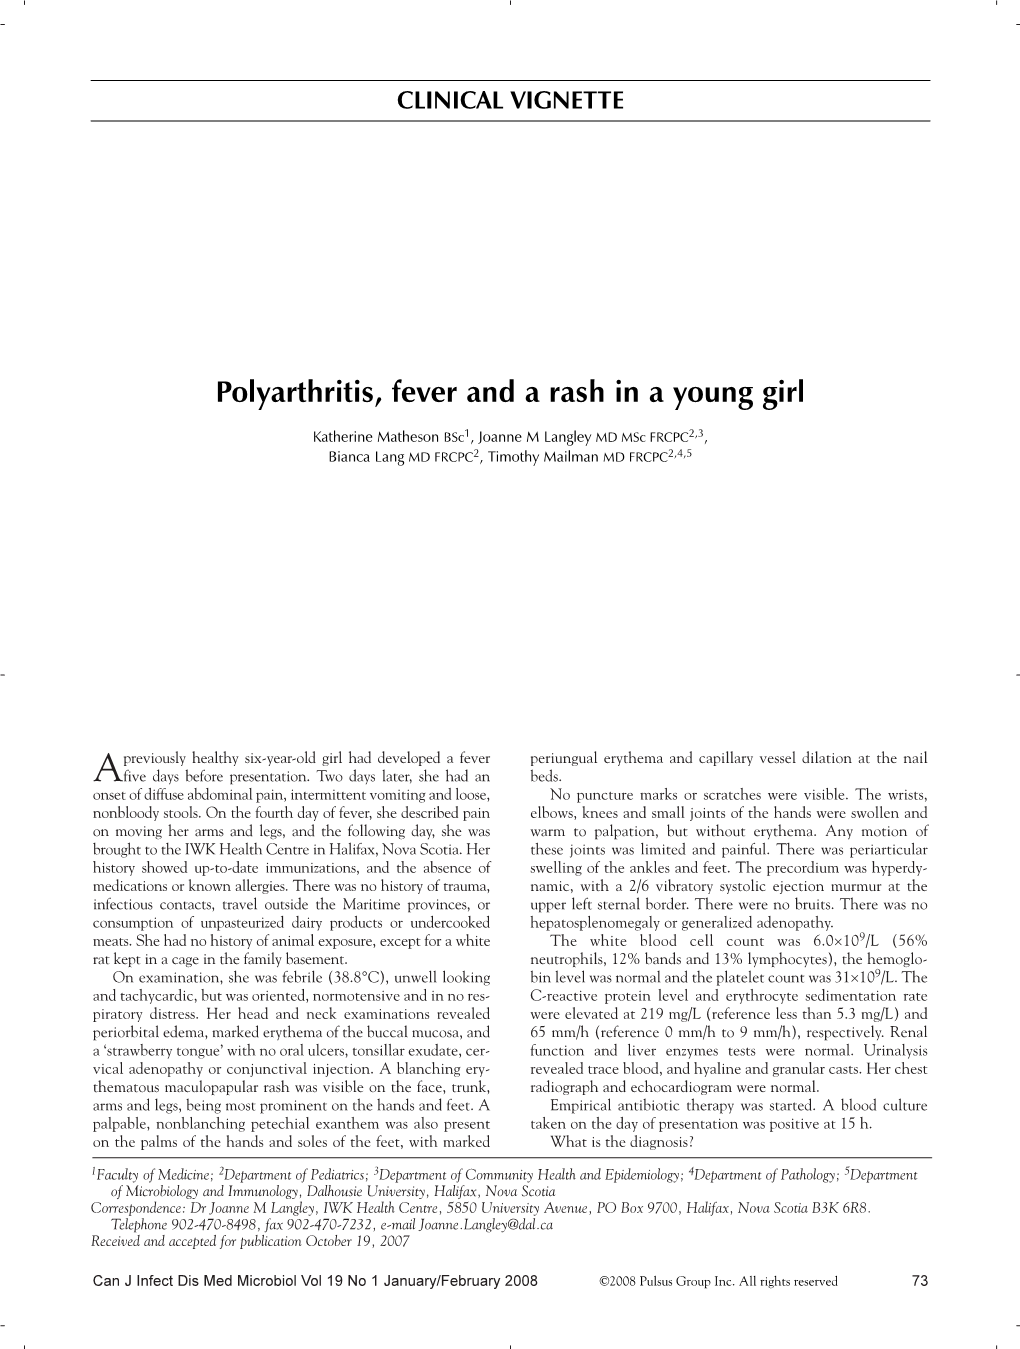 Polyarthritis, Fever and a Rash in a Young Girl